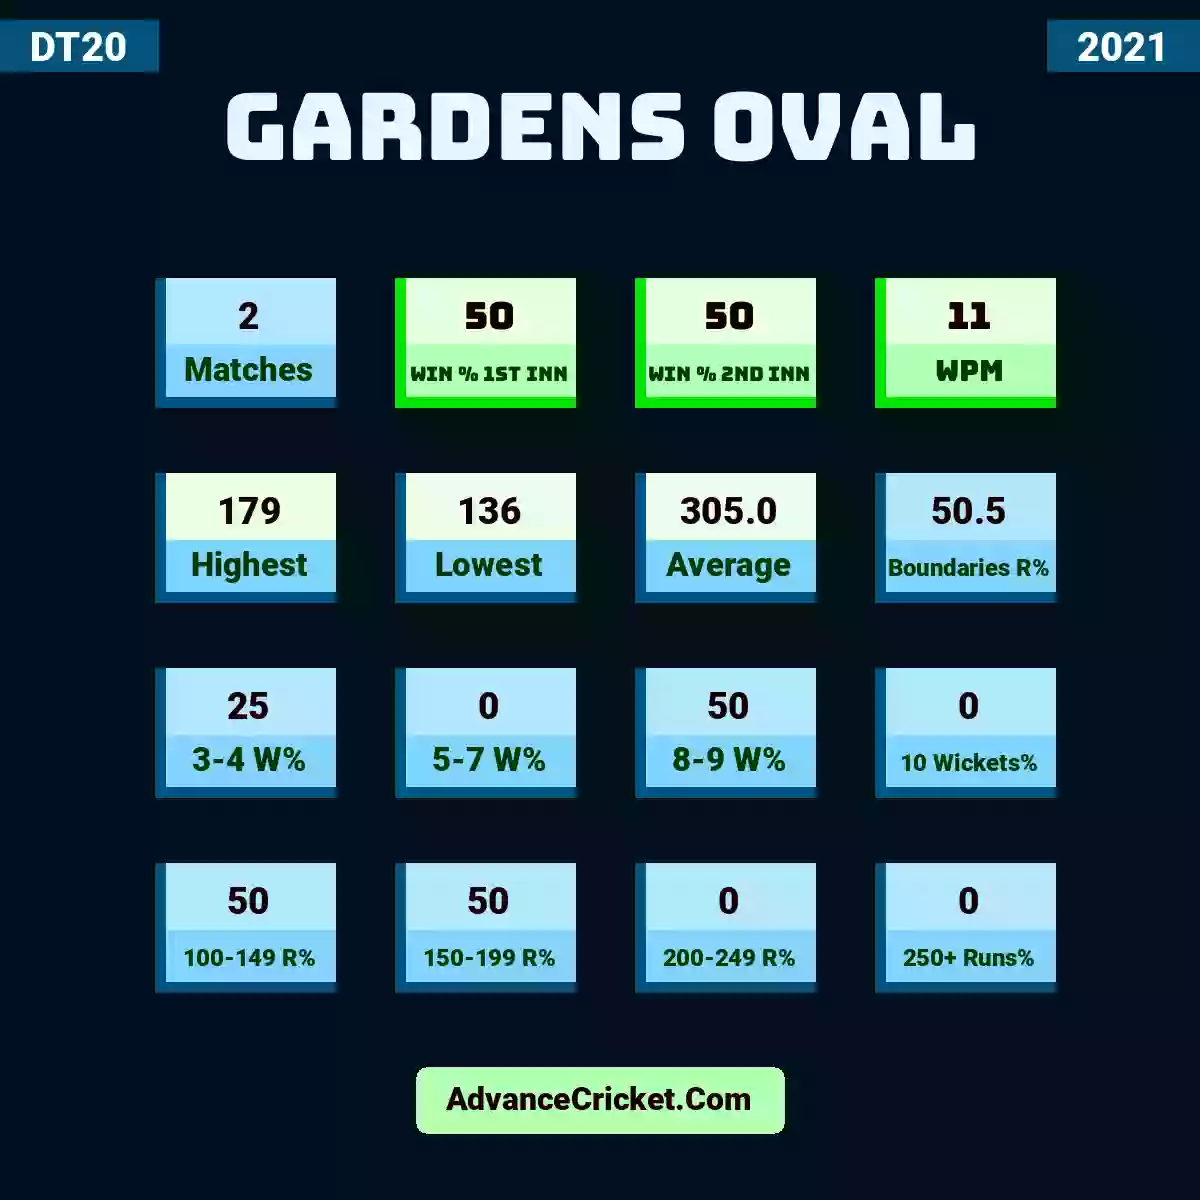 Image showing Gardens Oval with Matches: 2, Win % 1st Inn: 50, Win % 2nd Inn: 50, WPM: 11, Highest: 179, Lowest: 136, Average: 305.0, Boundaries R%: 50.5, 3-4 W%: 25, 5-7 W%: 0, 8-9 W%: 50, 10 Wickets%: 0, 100-149 R%: 50, 150-199 R%: 50, 200-249 R%: 0, 250+ Runs%: 0.